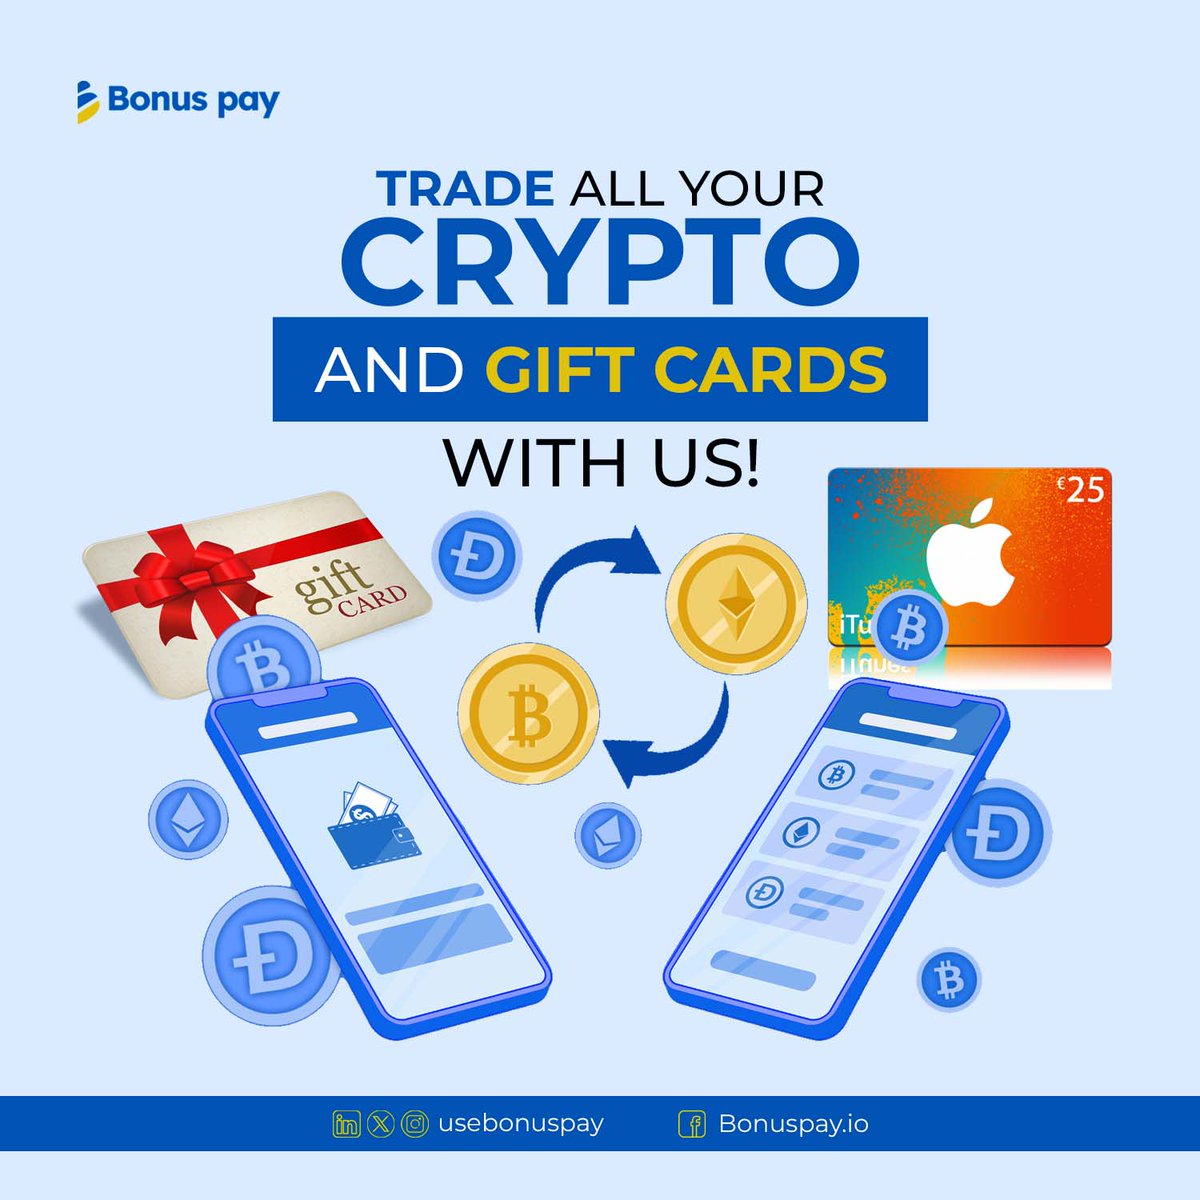 WELCOME TO BONUS PAY!

We're here to help you in purchasing and selling your digital assets such as Bitcoin, Ethereum and gift cards.

Send a direct message via the link in bio

#bonuspay #bitcoin #ethereum #giftcards #bestrate #trading